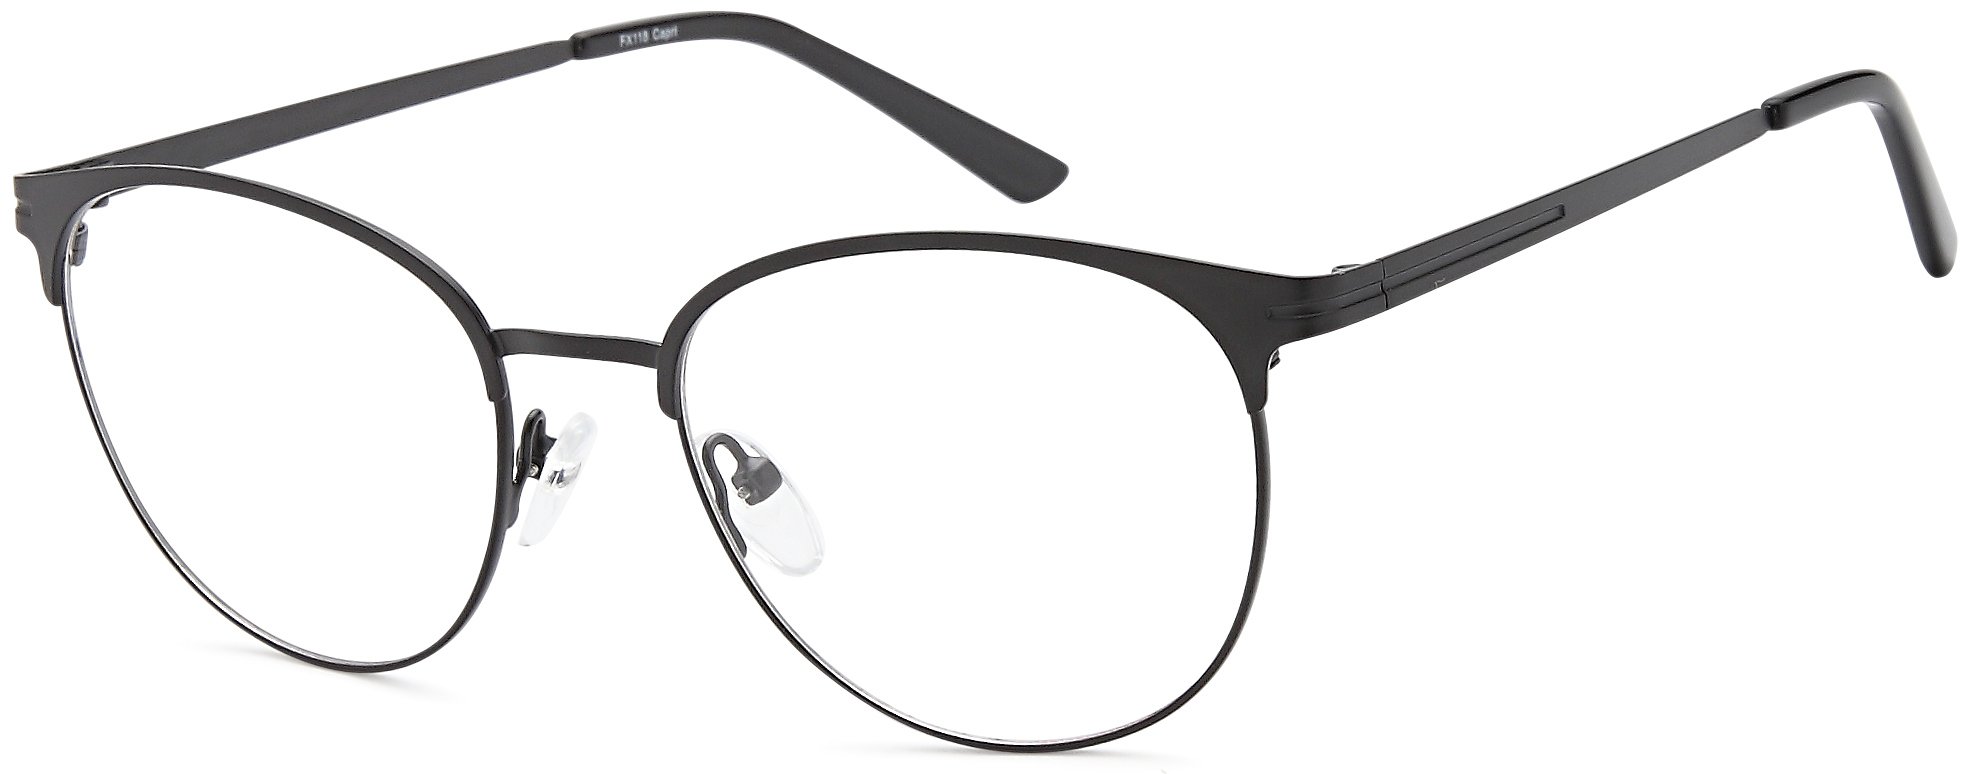 Picture of Flexure Eyeglasses FX118